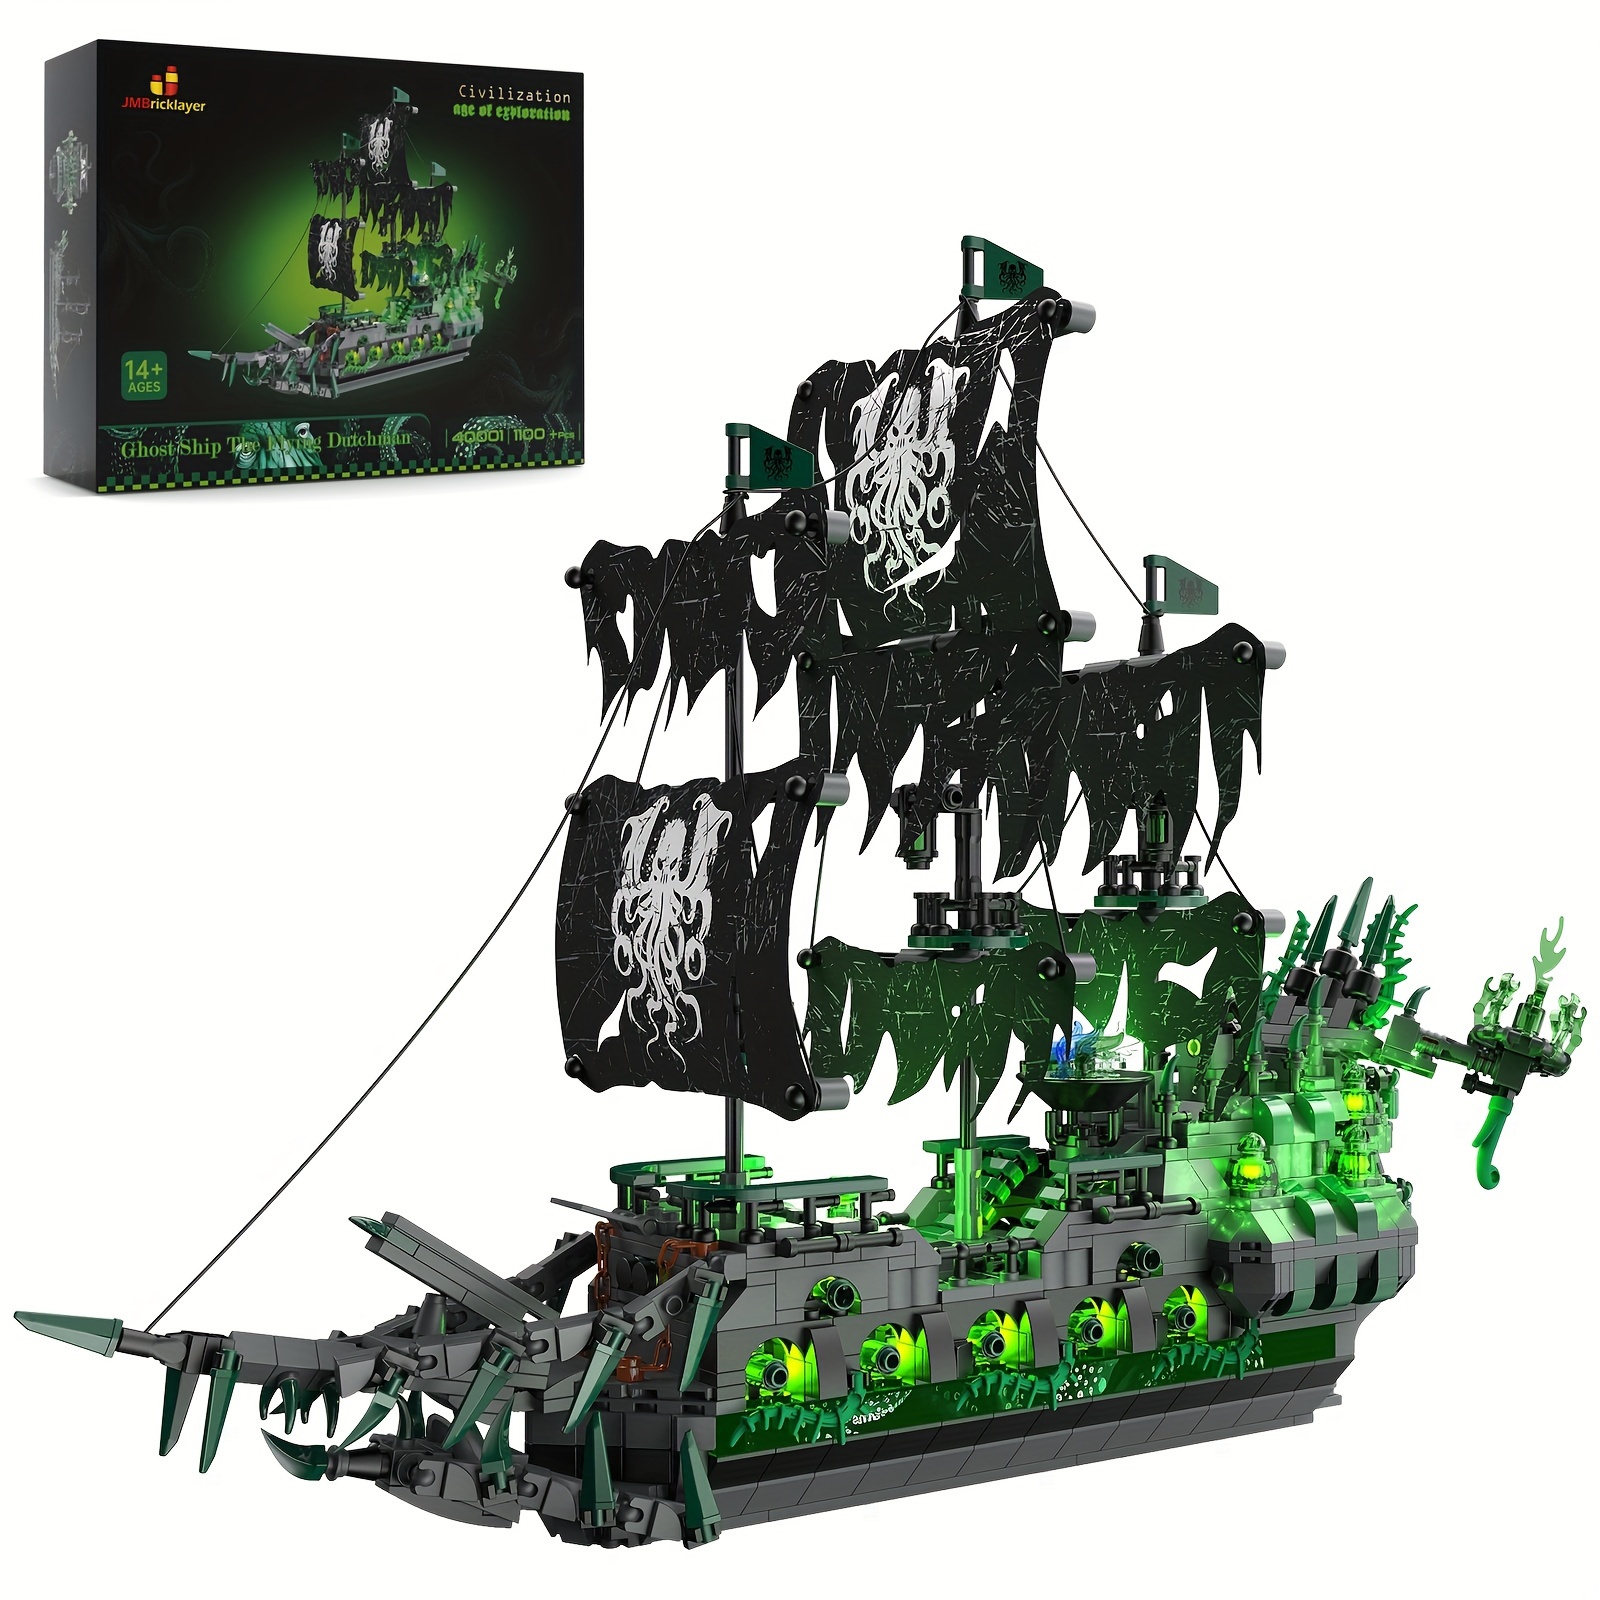 

Pirate Ship Building Toys With Lights, Flying Model Ship Boat 40001, Toy Building Sets